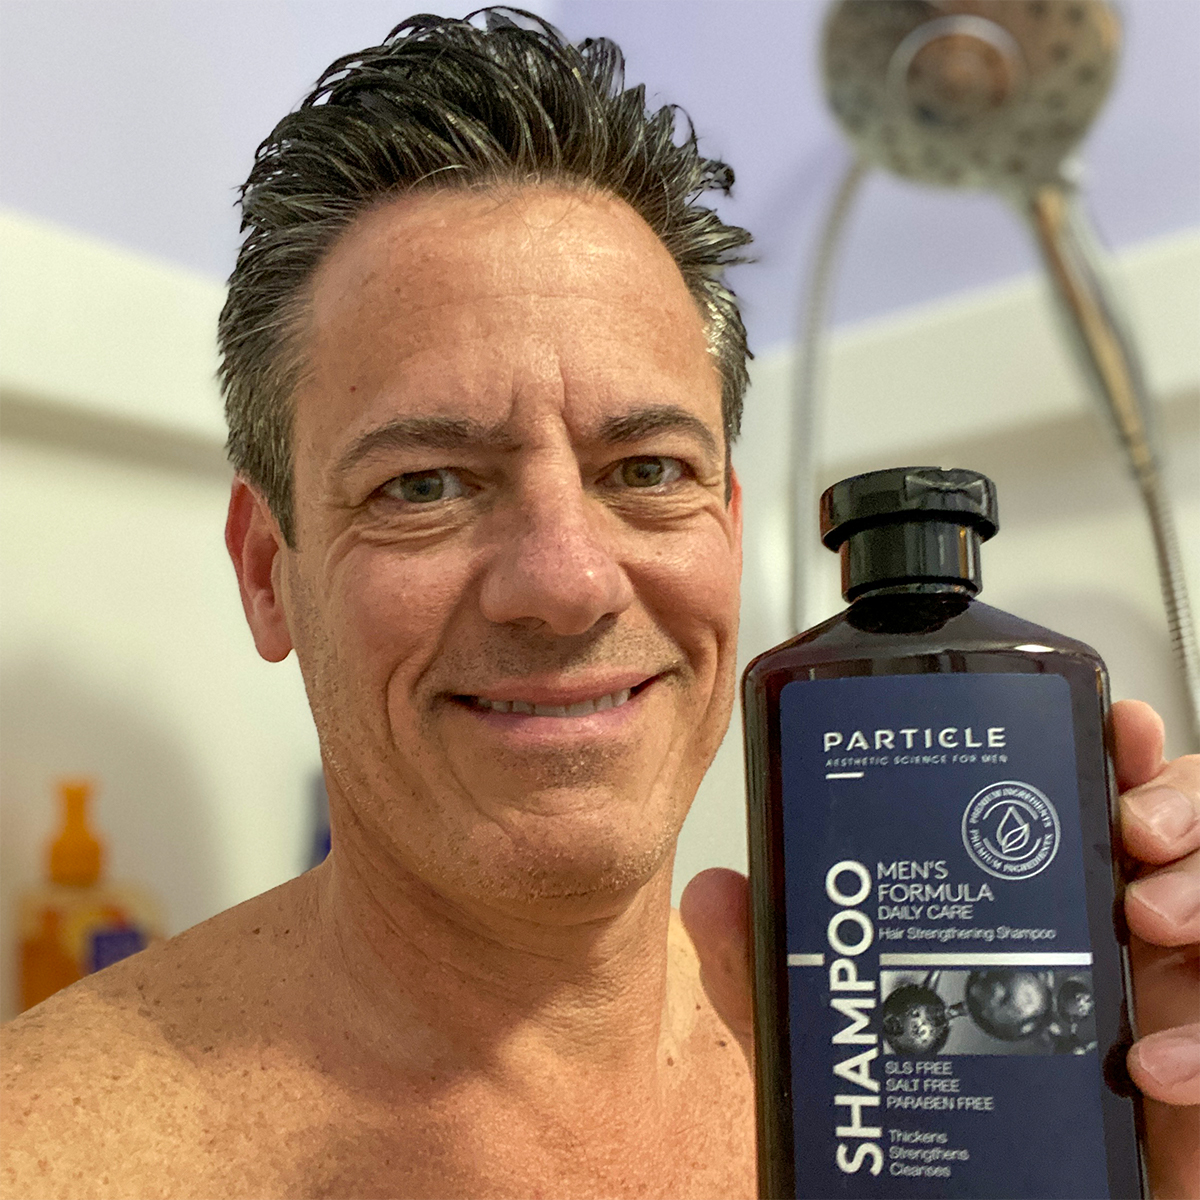 A shirtless man smiling, holding a brown bottle of Particle Men's Formula Shampoo with blue label.